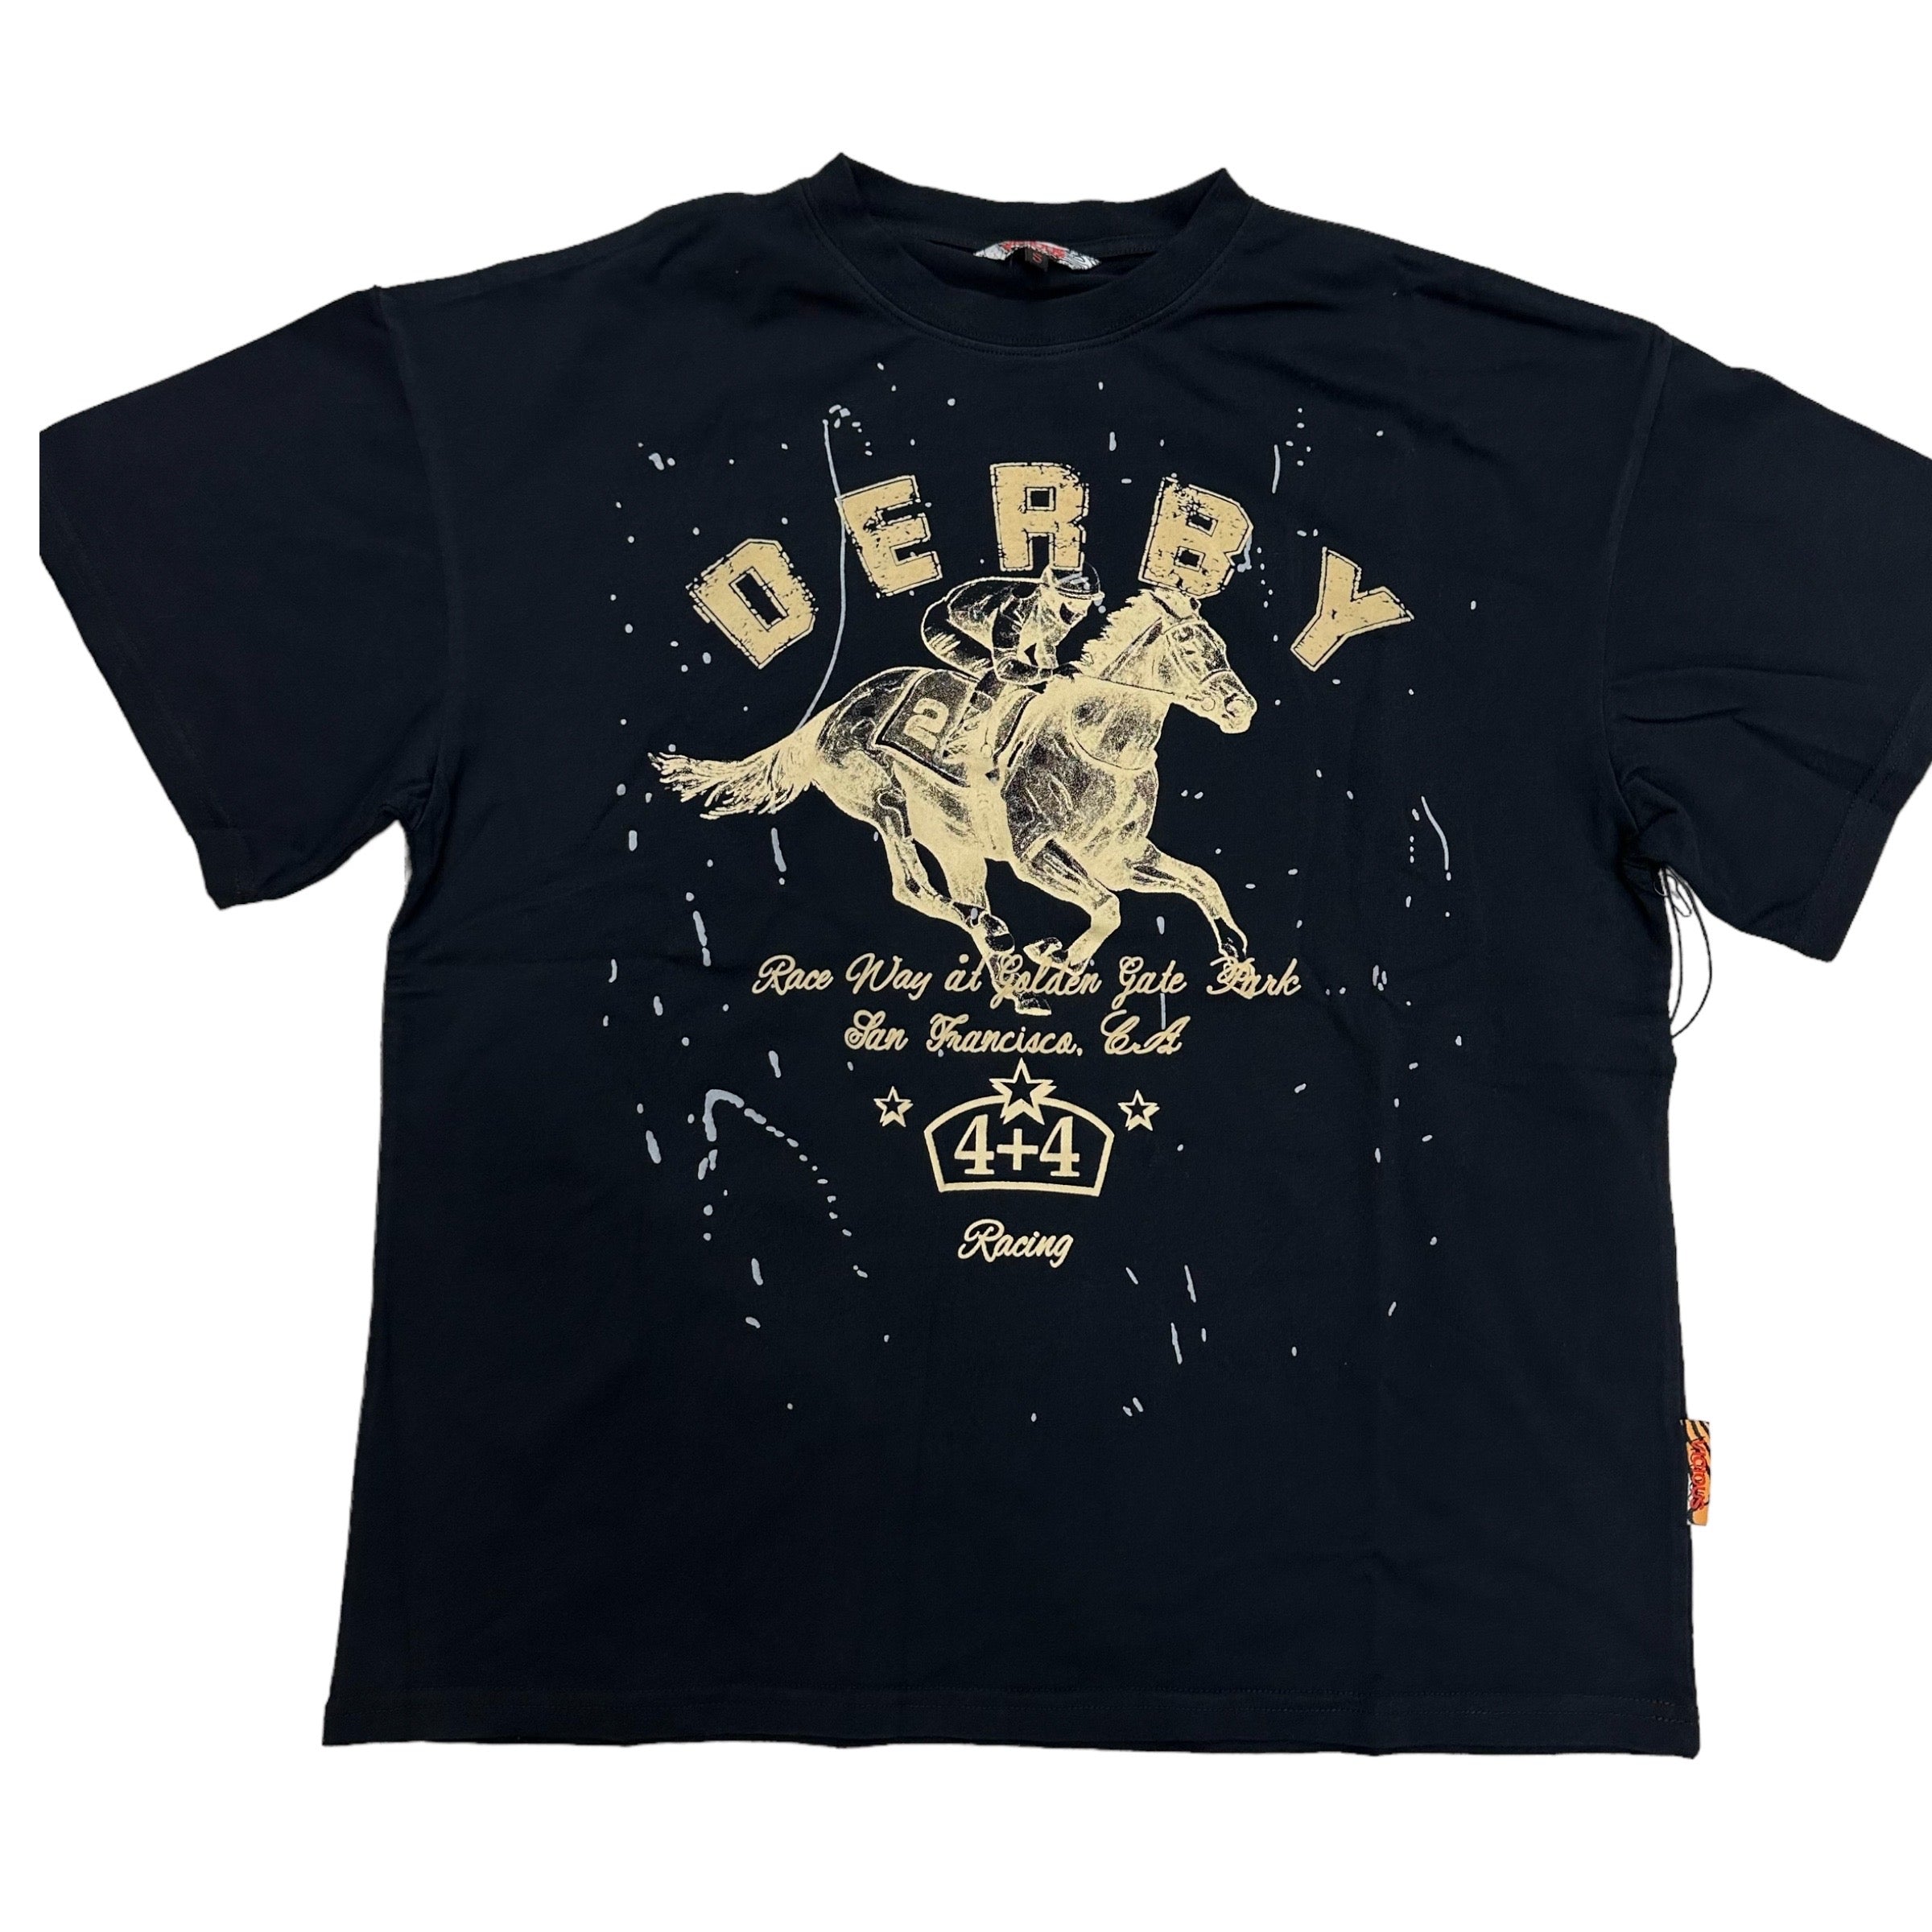 Vicious Derby Distressed over size T-shirt Black 450